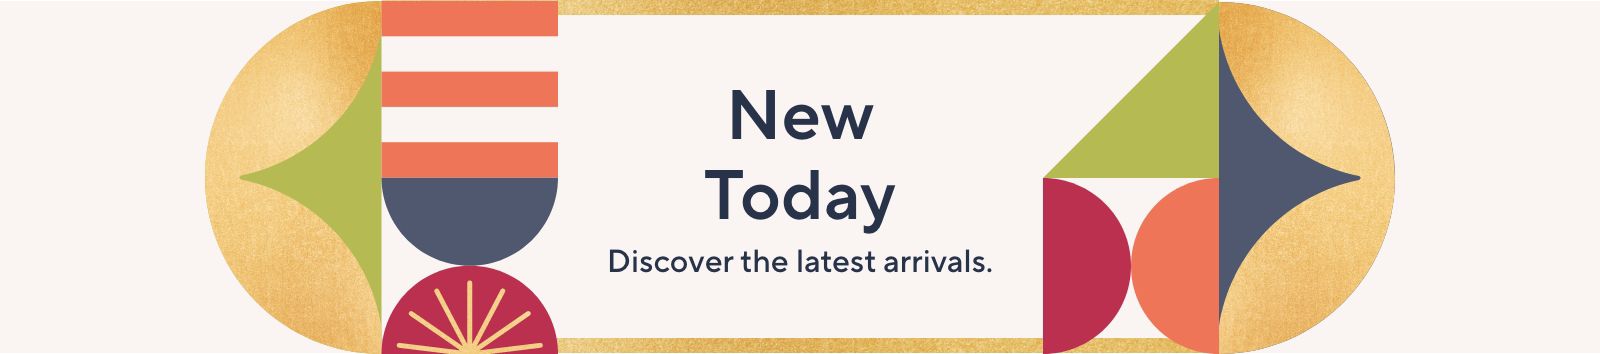 New Today: Discover the latest arrivals. 